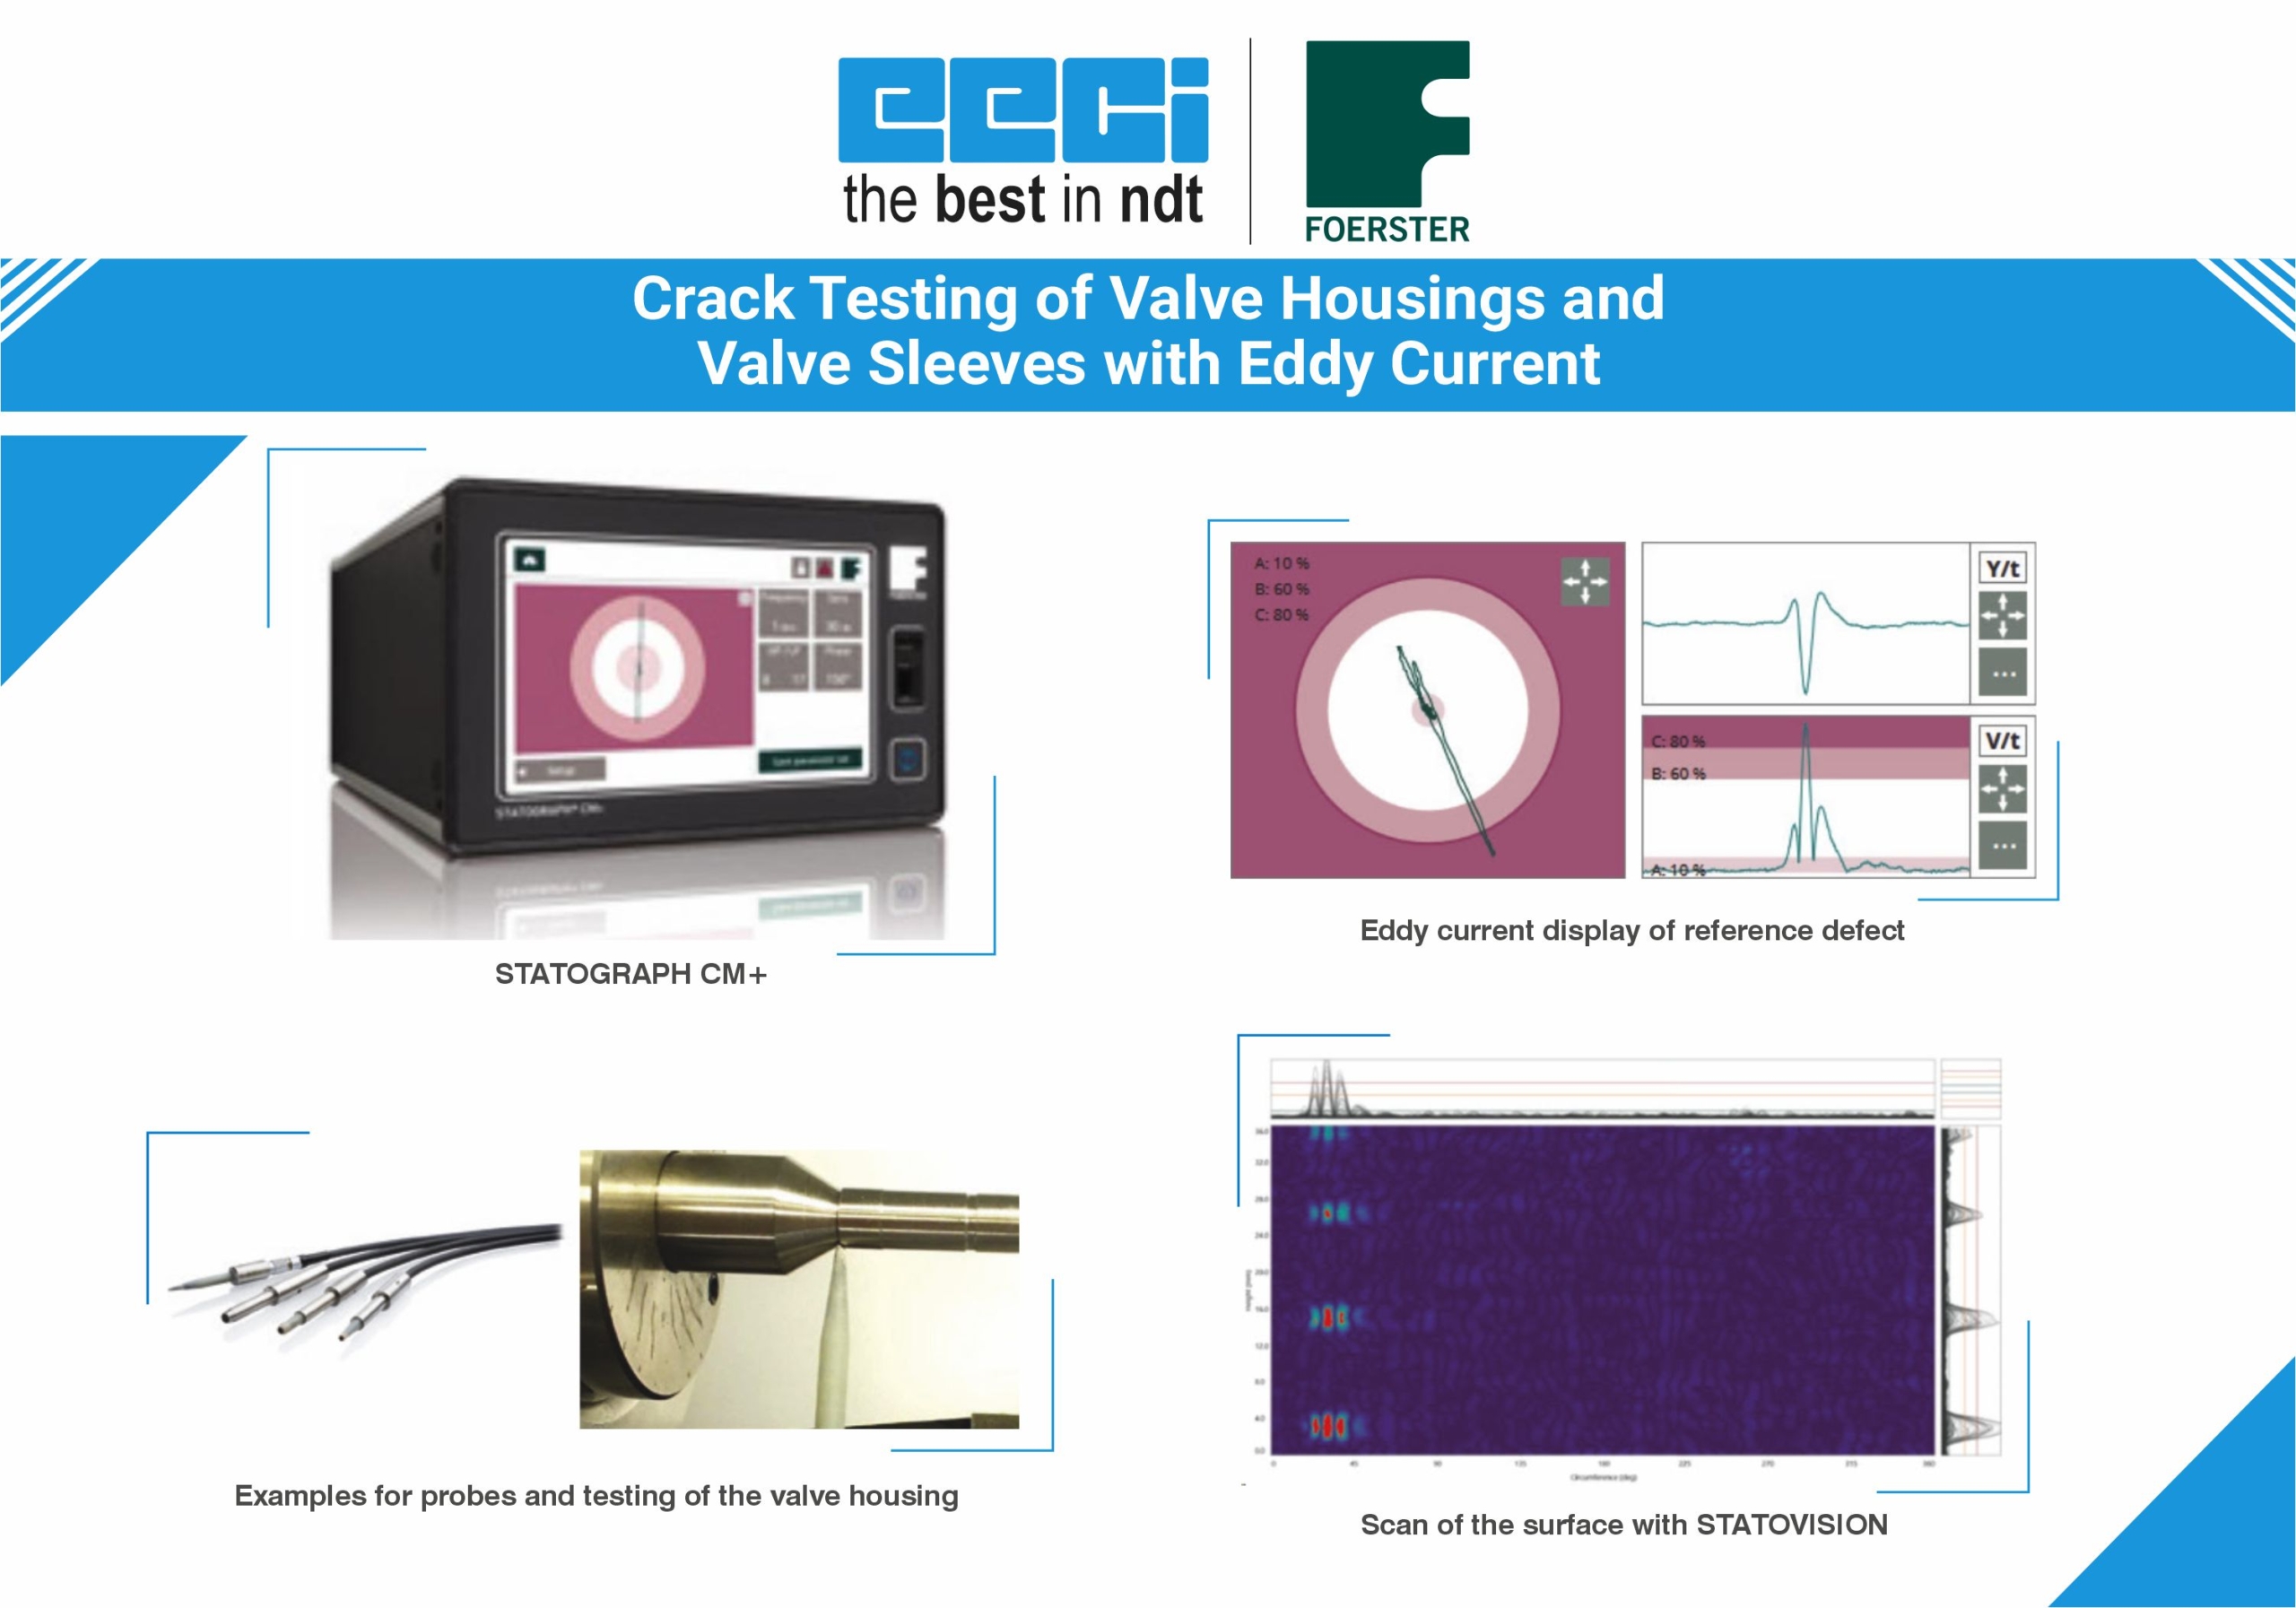 Crack Testing of Valve Housings and Valve Sleeves with Eddy Current